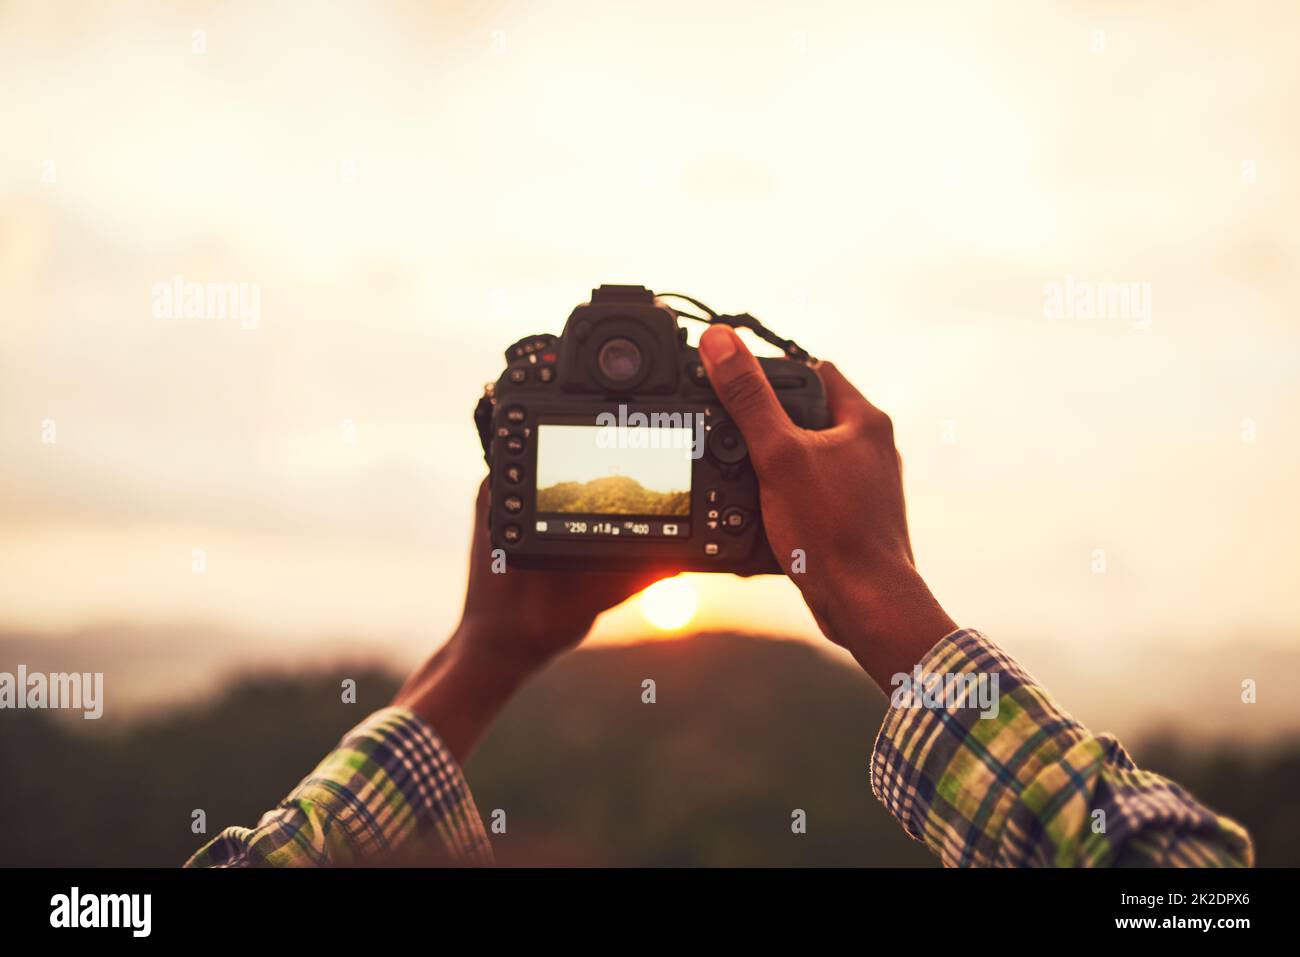 Viewing natures beauty through a lens. Closeup shot of an unidentifiable man taking a photo on a camera outside. Stock Photo